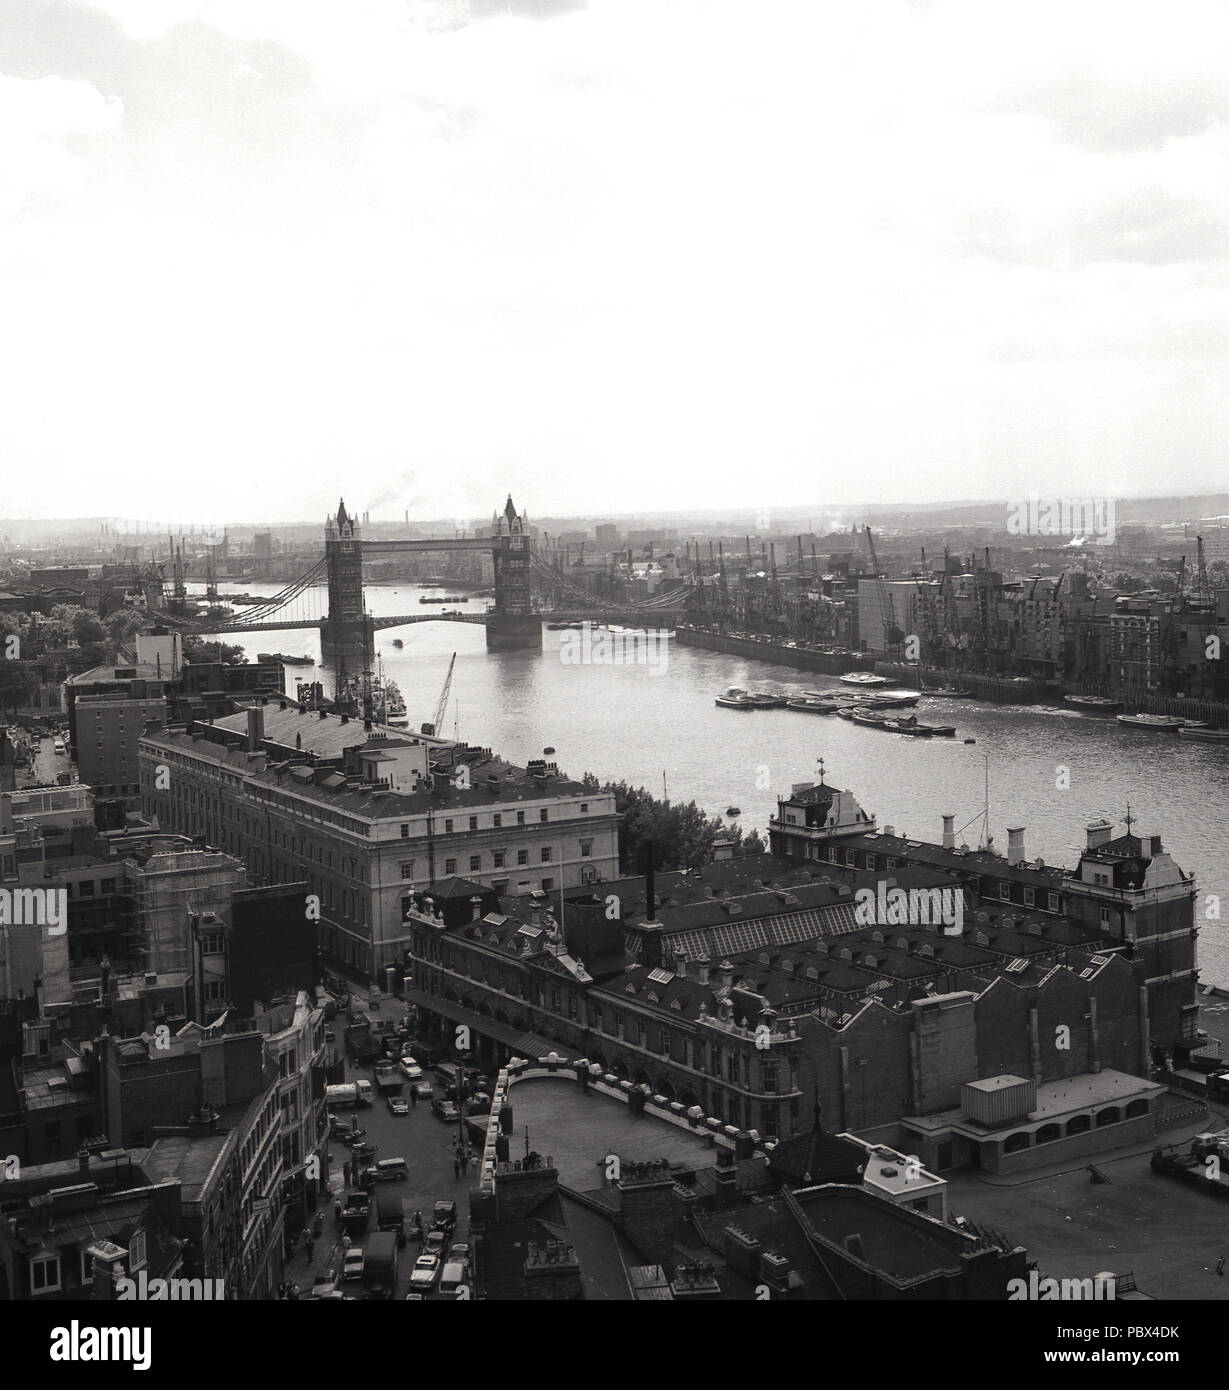 1950s, historical, a view down the river Thames looking south, with Tower Bridge in the distance, London, England, UK. At the bottom of the picture is the Billingsgate fish market at Lower Thames Street. At this time, the Thames was very much a working industrial river, as can be seen by the large number of loading or quay cranes at the different wharves where the ships would load and unload their cargo. Stock Photo